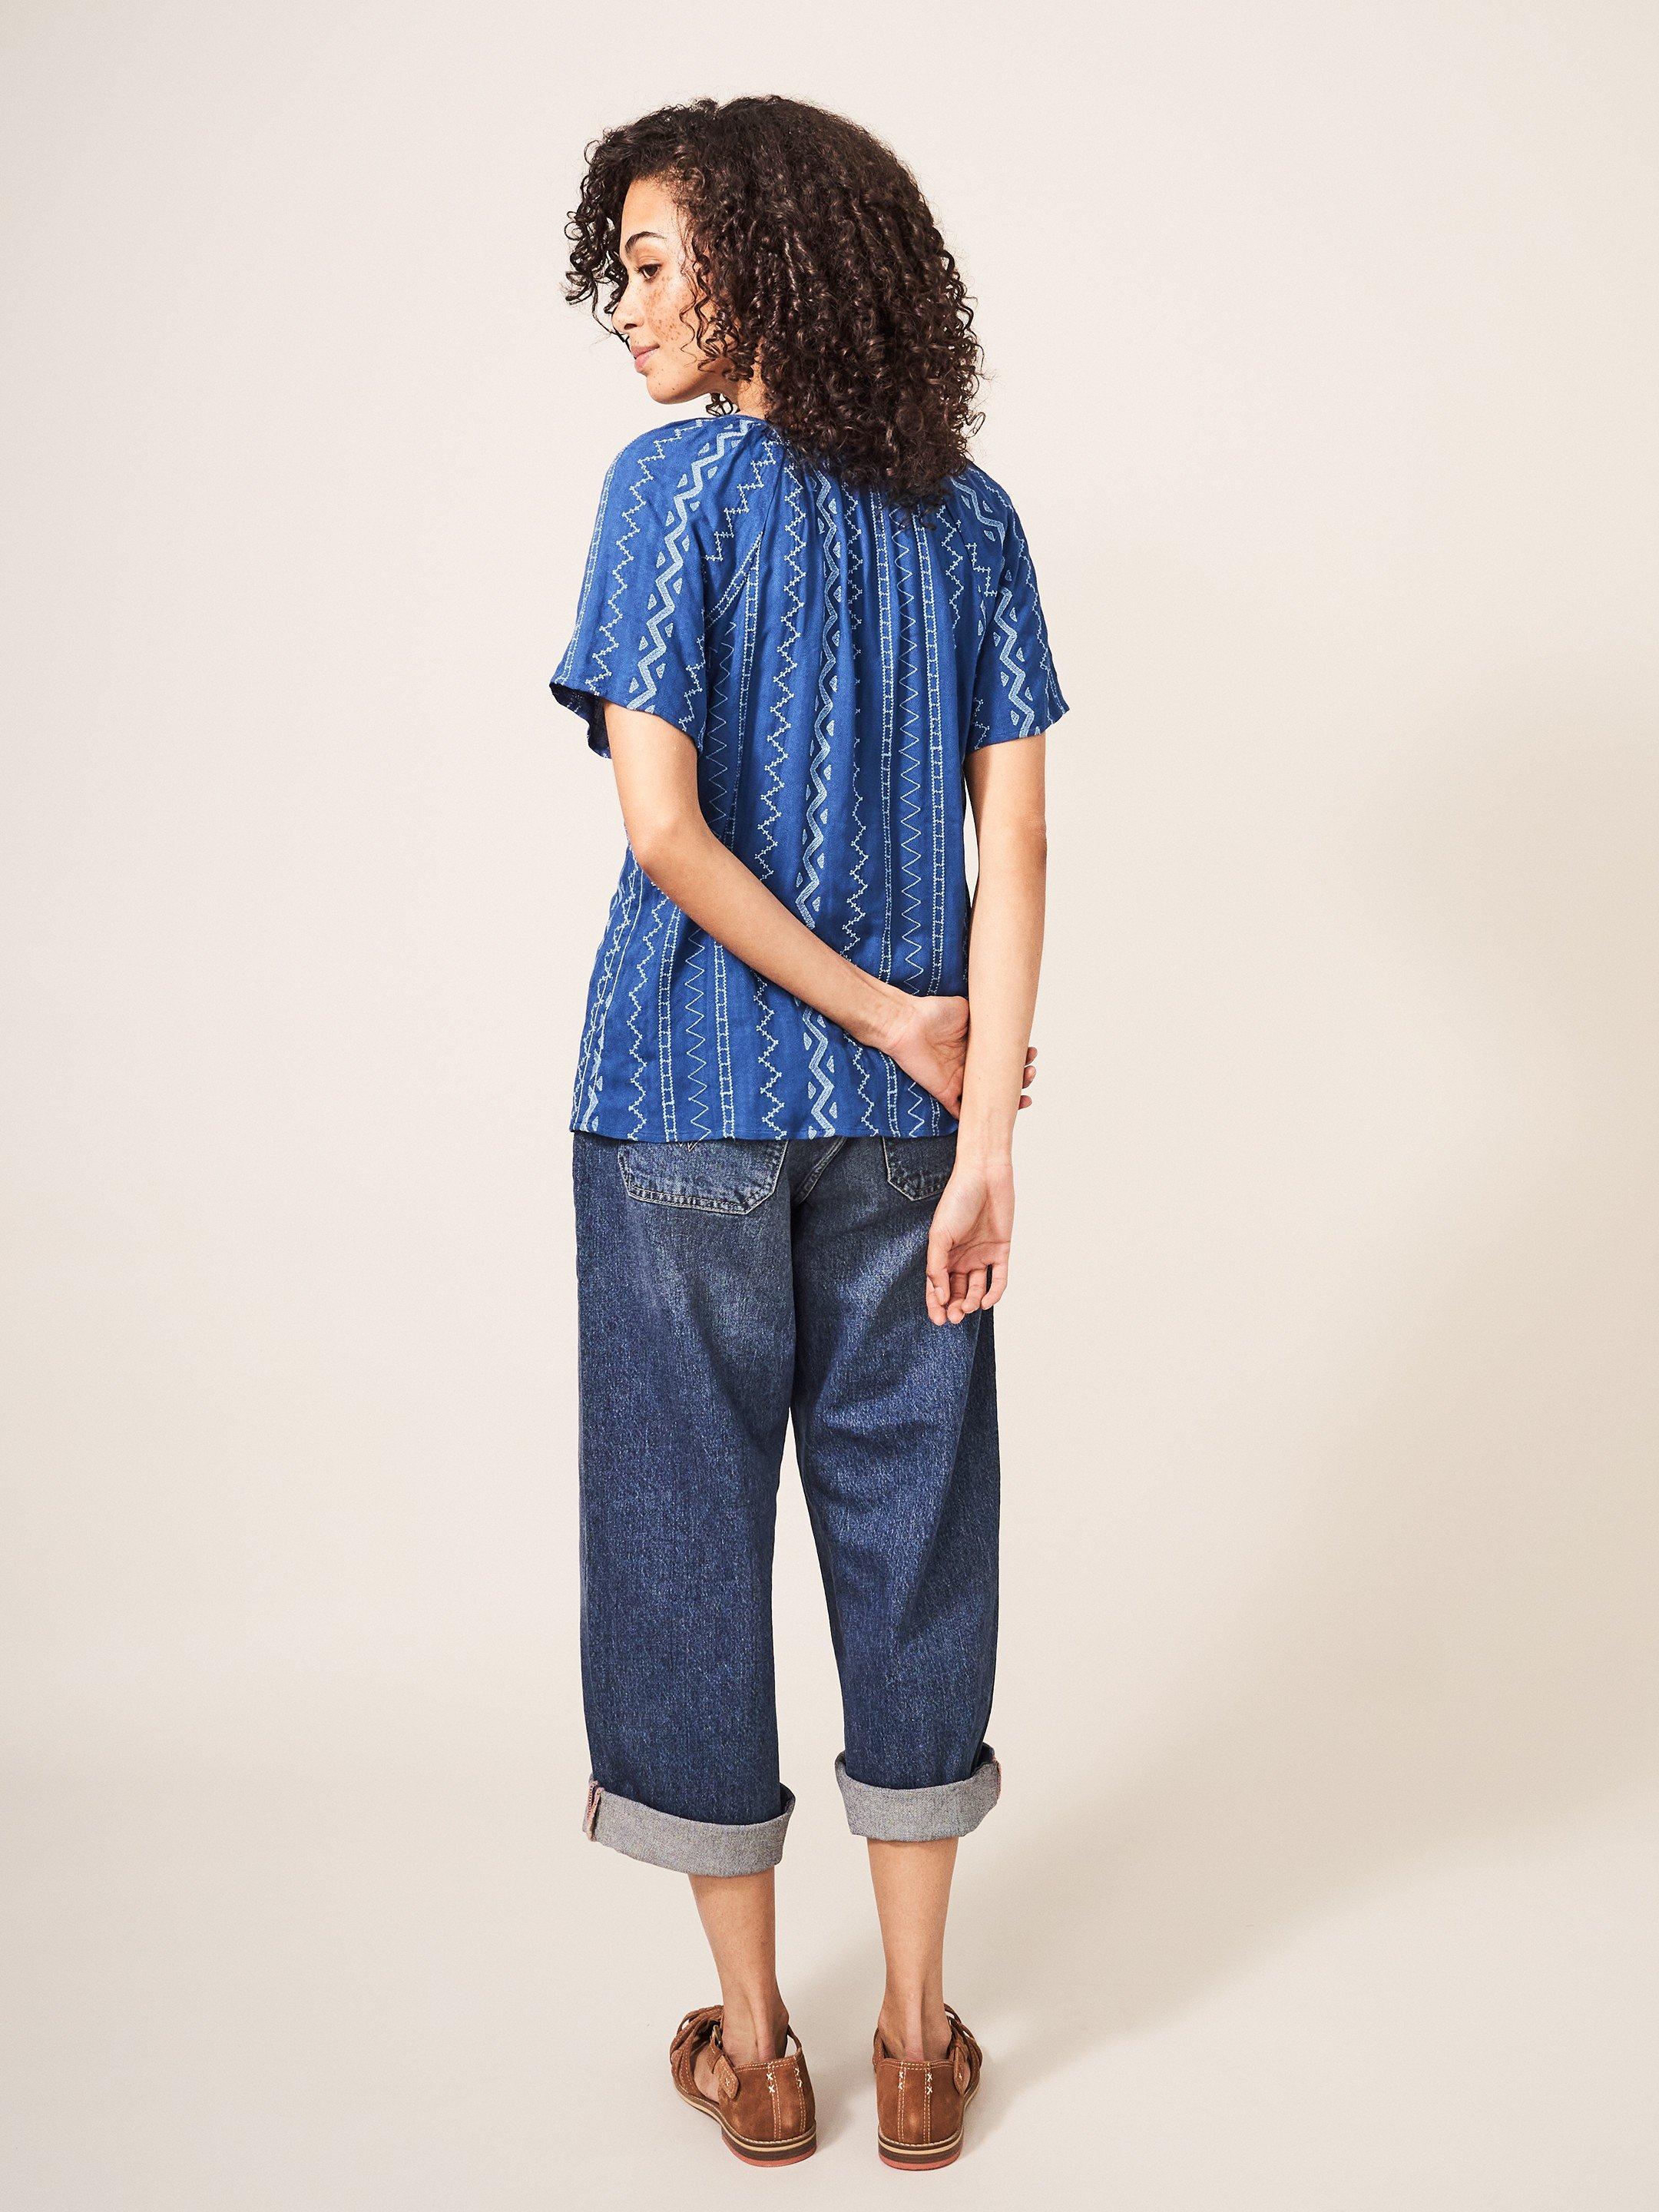 Aida Embroidered Top in BLUE MLT - MODEL BACK